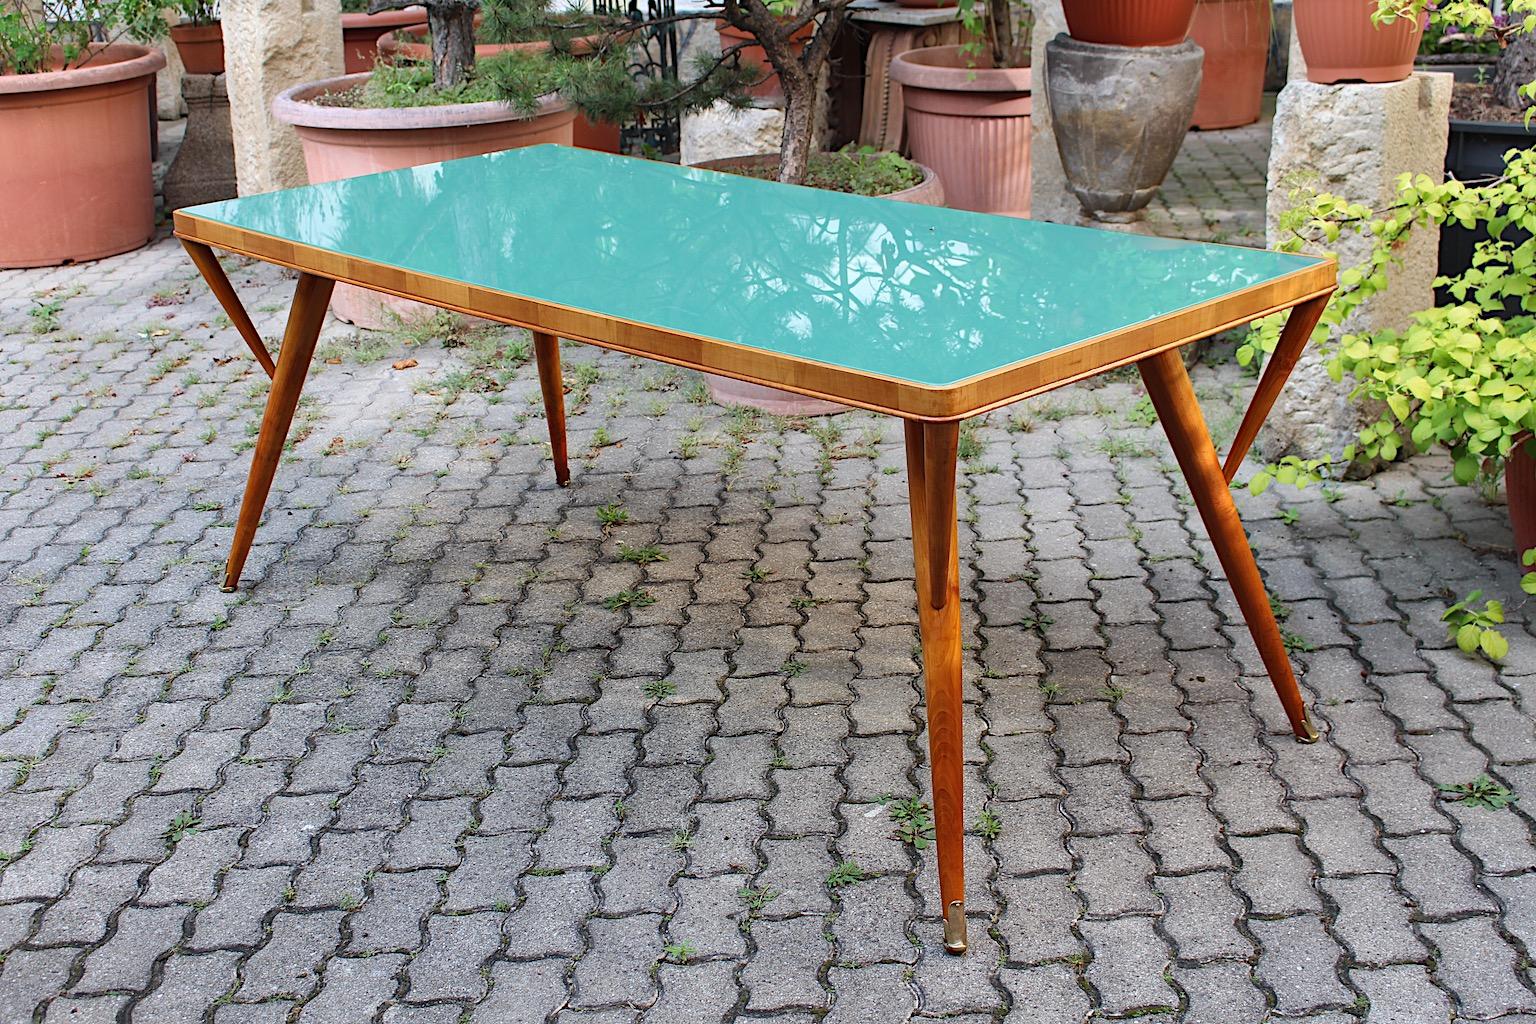 Mid Century Modern vintage dining table or writing desk or bureau plat very similar to Ico Parisi from solid cherrywood topped with green turquoise teal glass plate and beautiful brass details designed and manufactured Italy 1940s.
The cherrywood